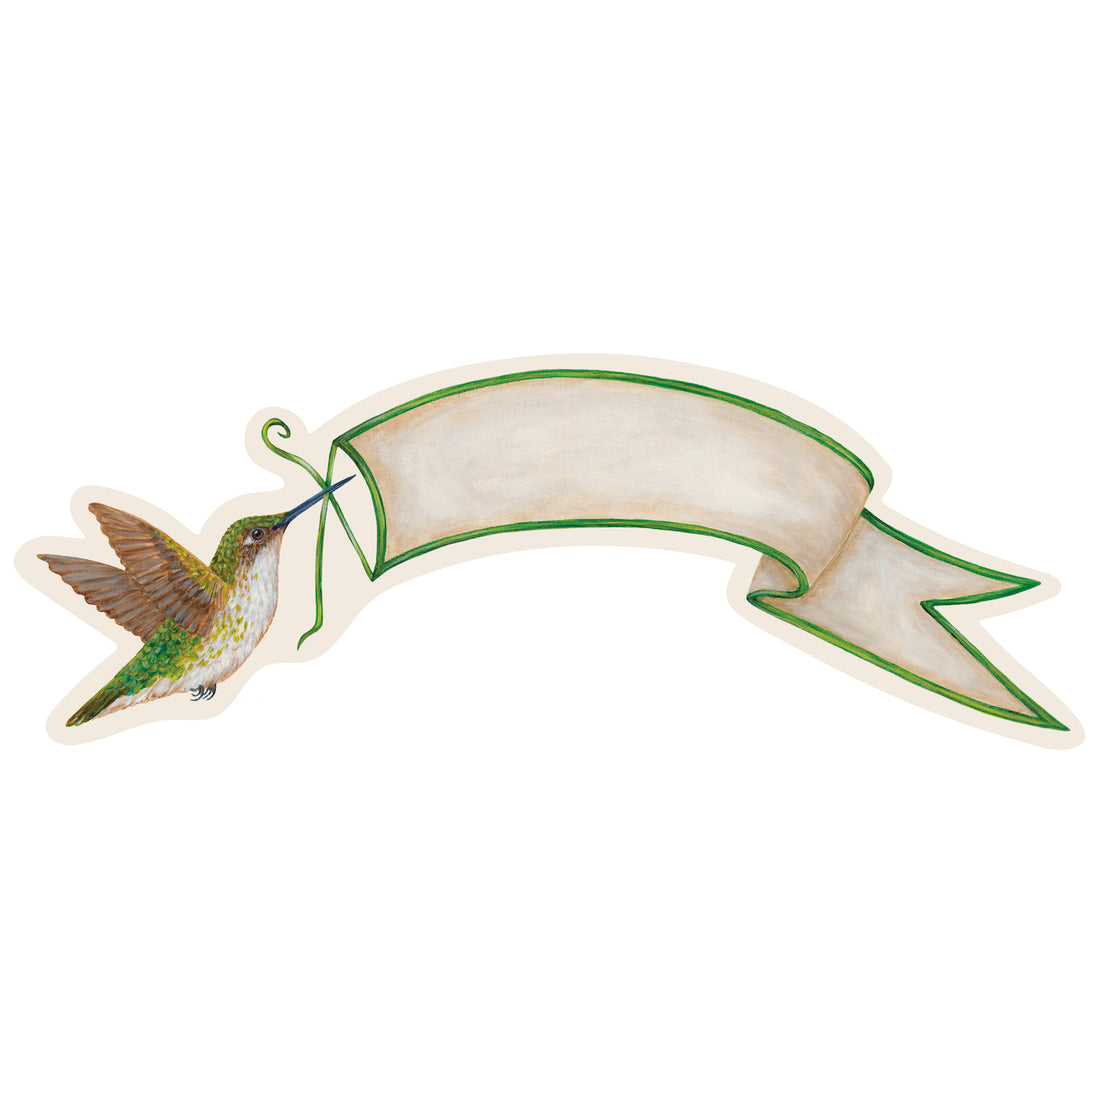 A die-cut illustration of a realistic green and white hummingbird in flight, holding a white banner rimmed in green, creating a perfect place for personalization.